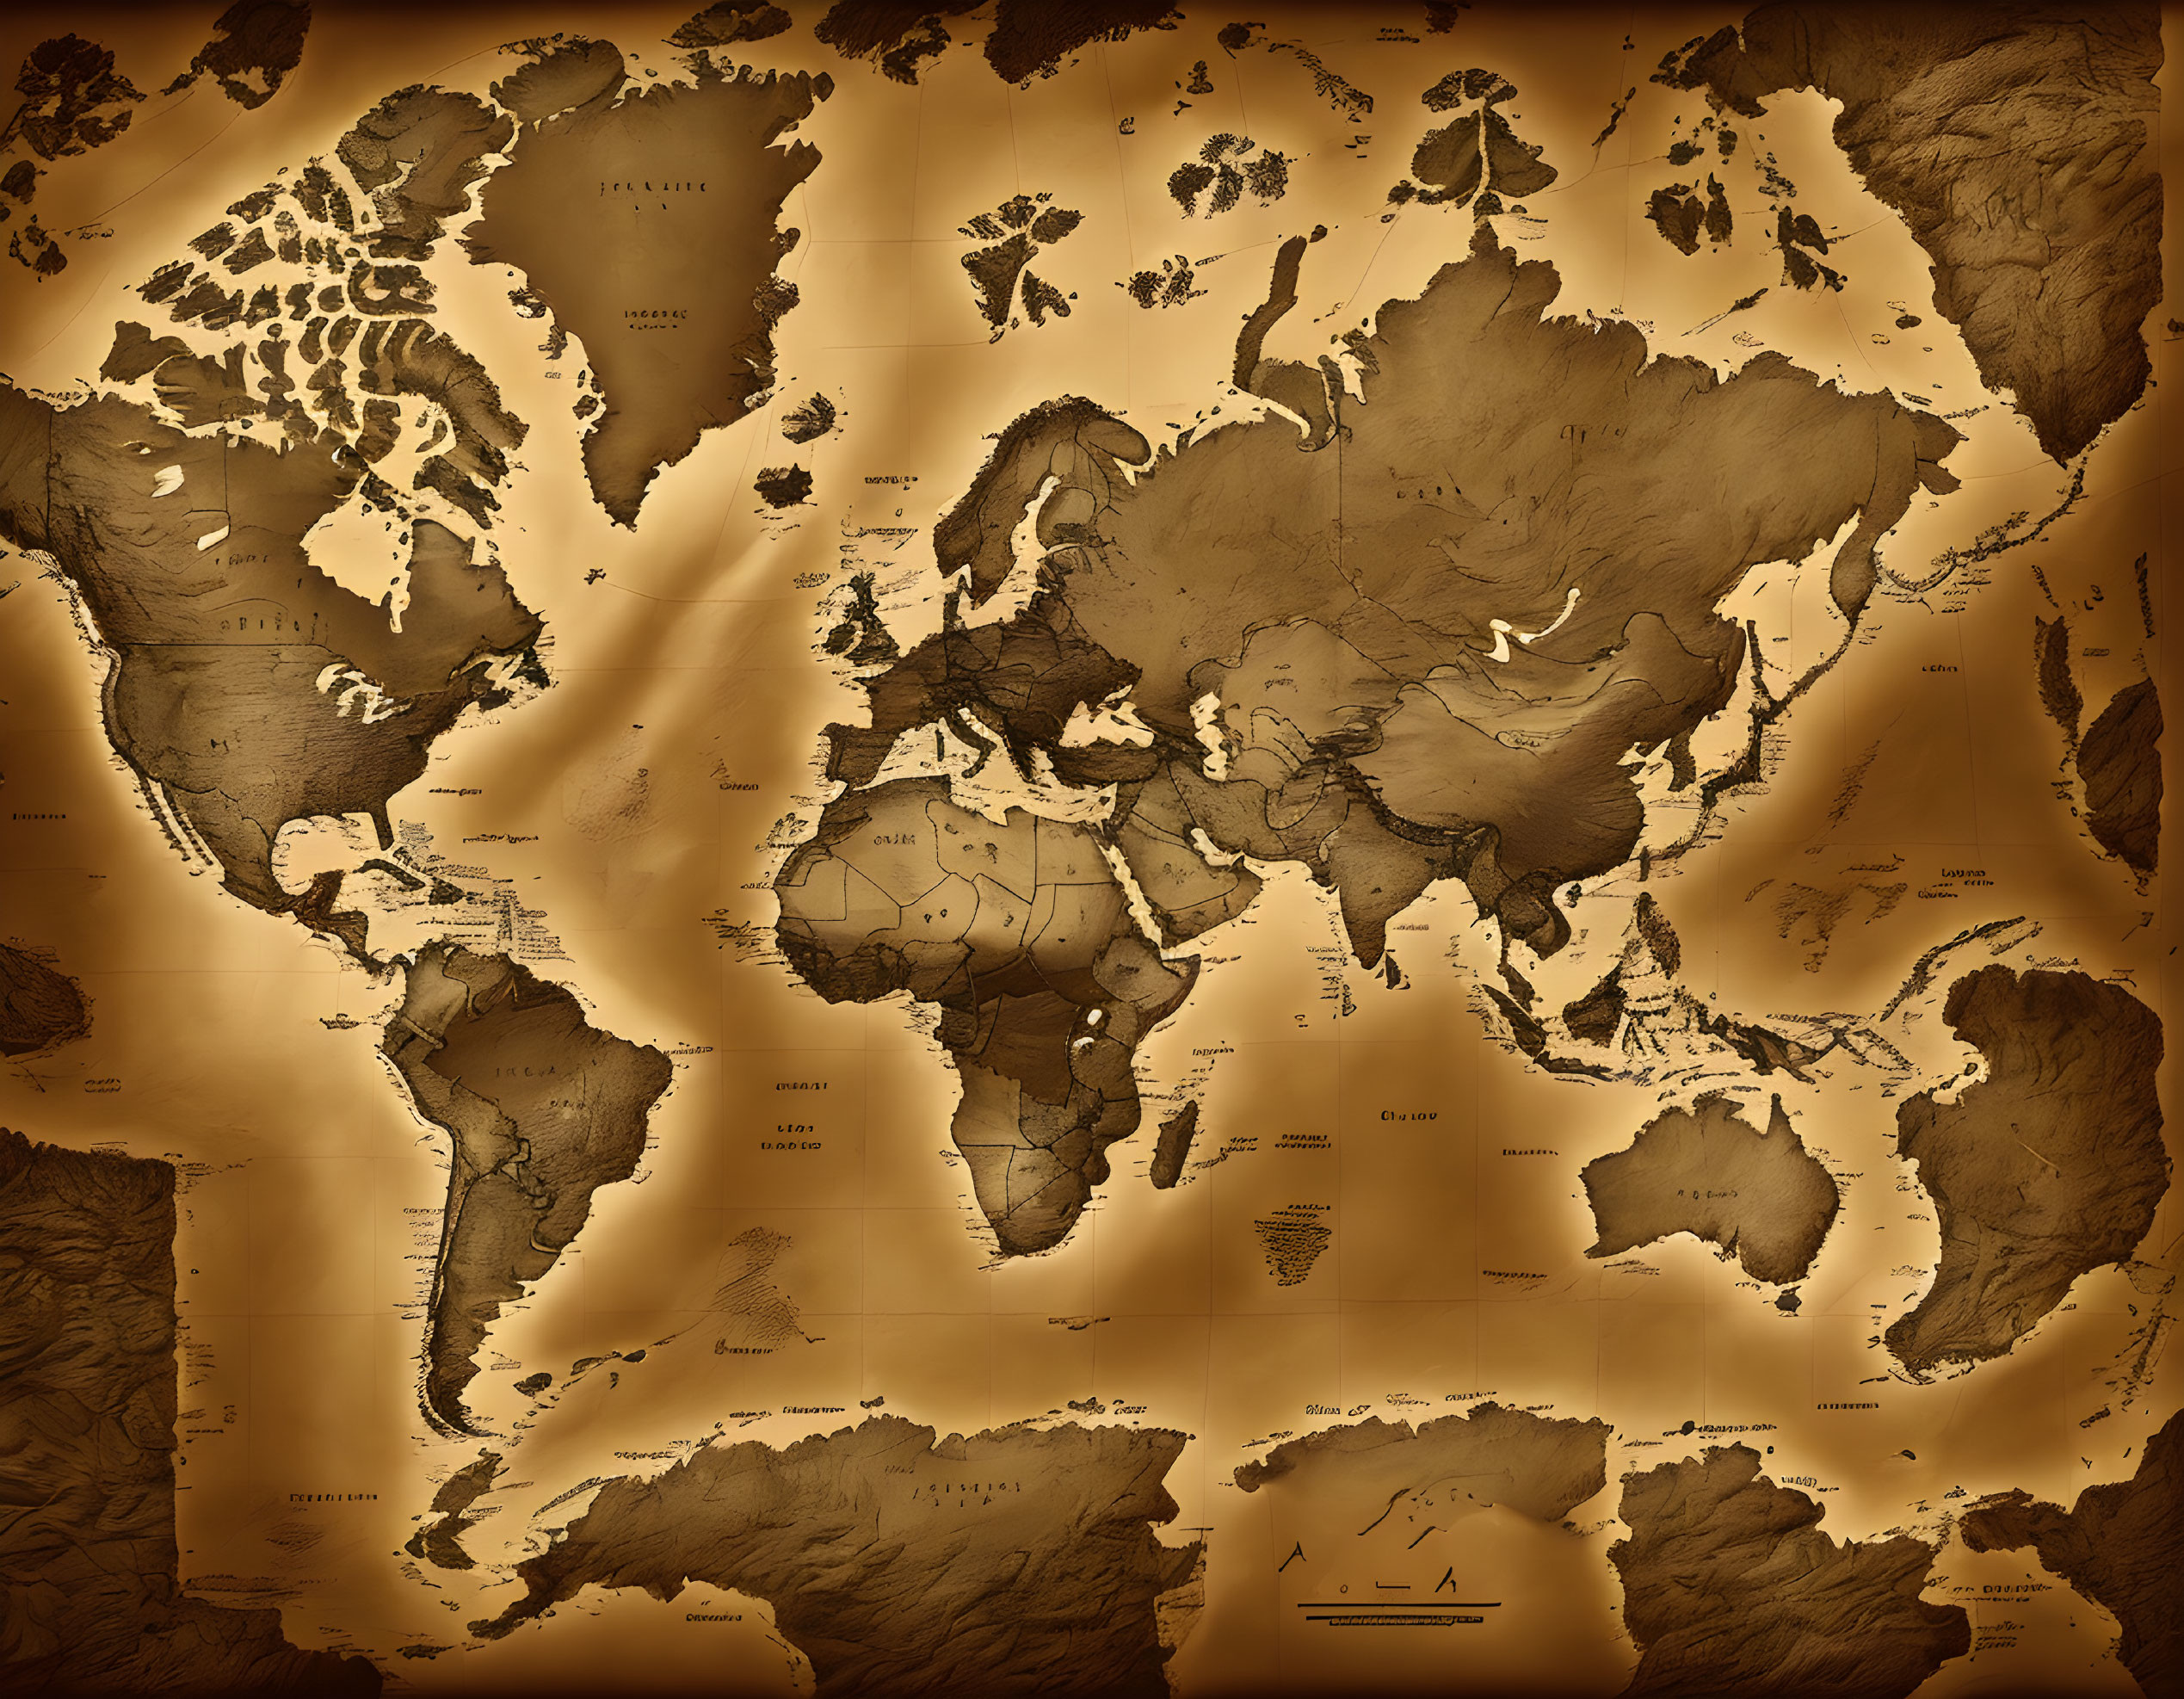 Vintage-style World Map with Sepia Tone & Geographic Relief Details